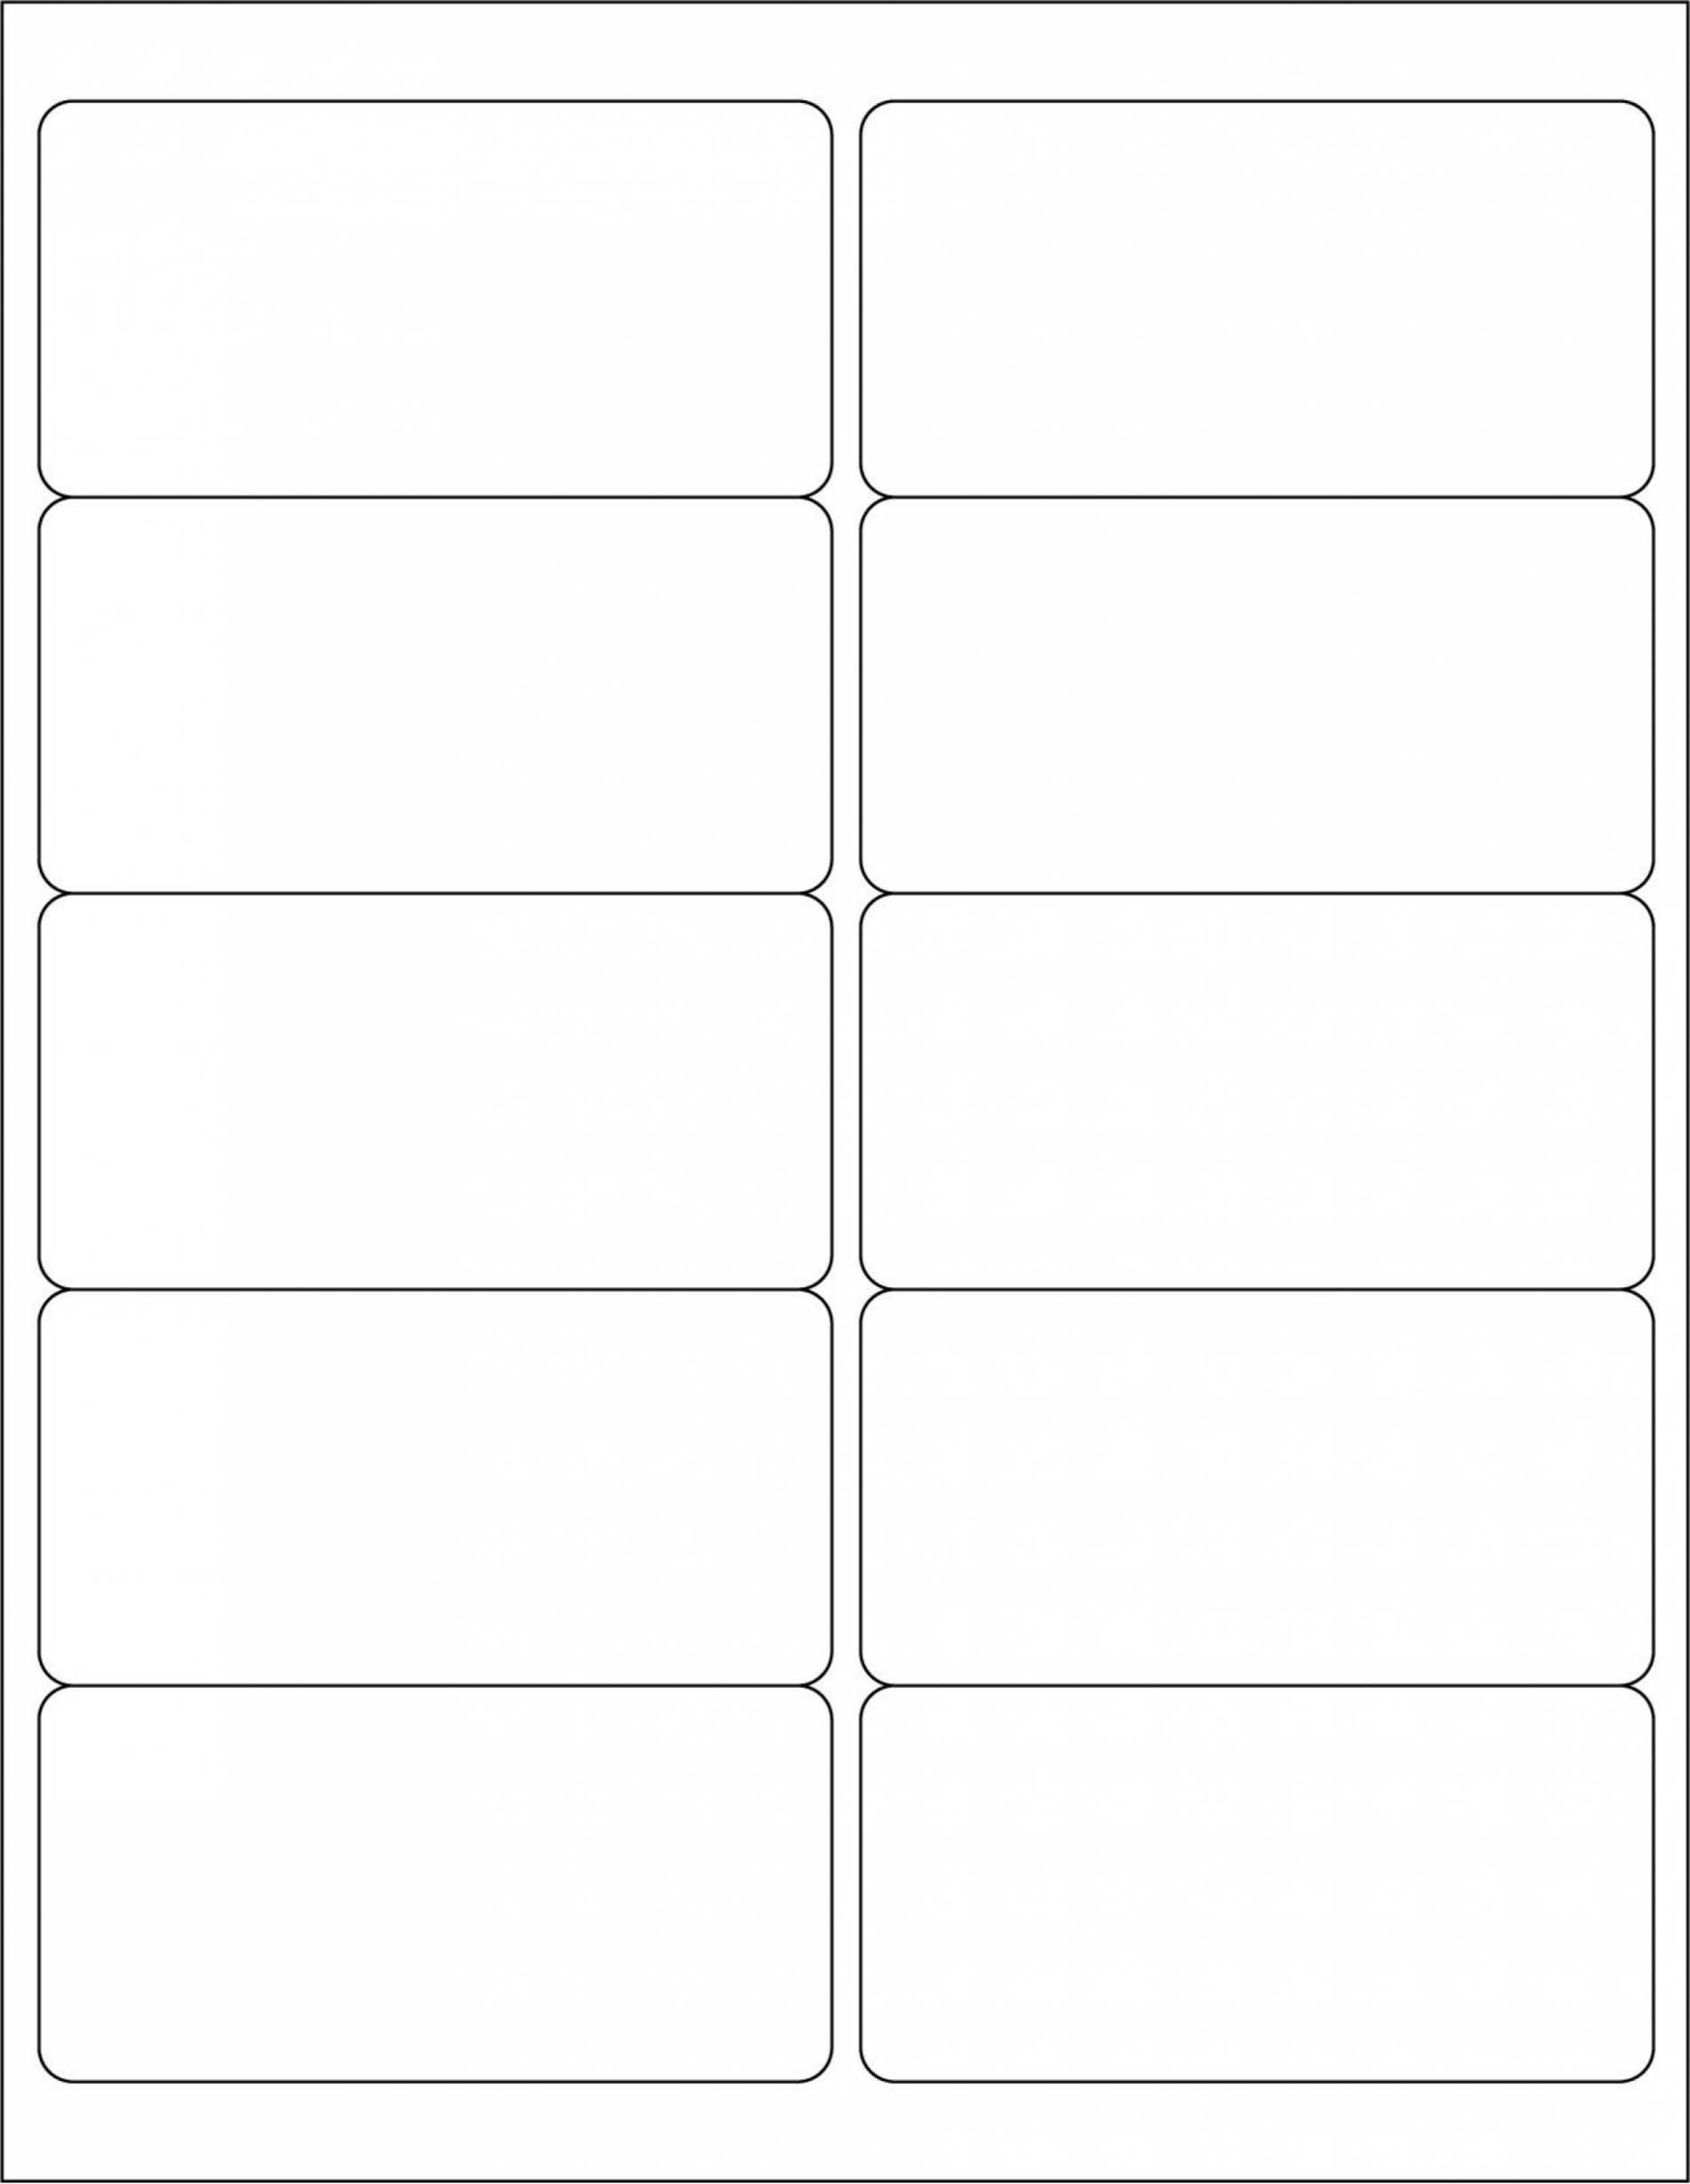 Label Template For Word ~ Addictionary intended for Word Label Template 8 Per Sheet